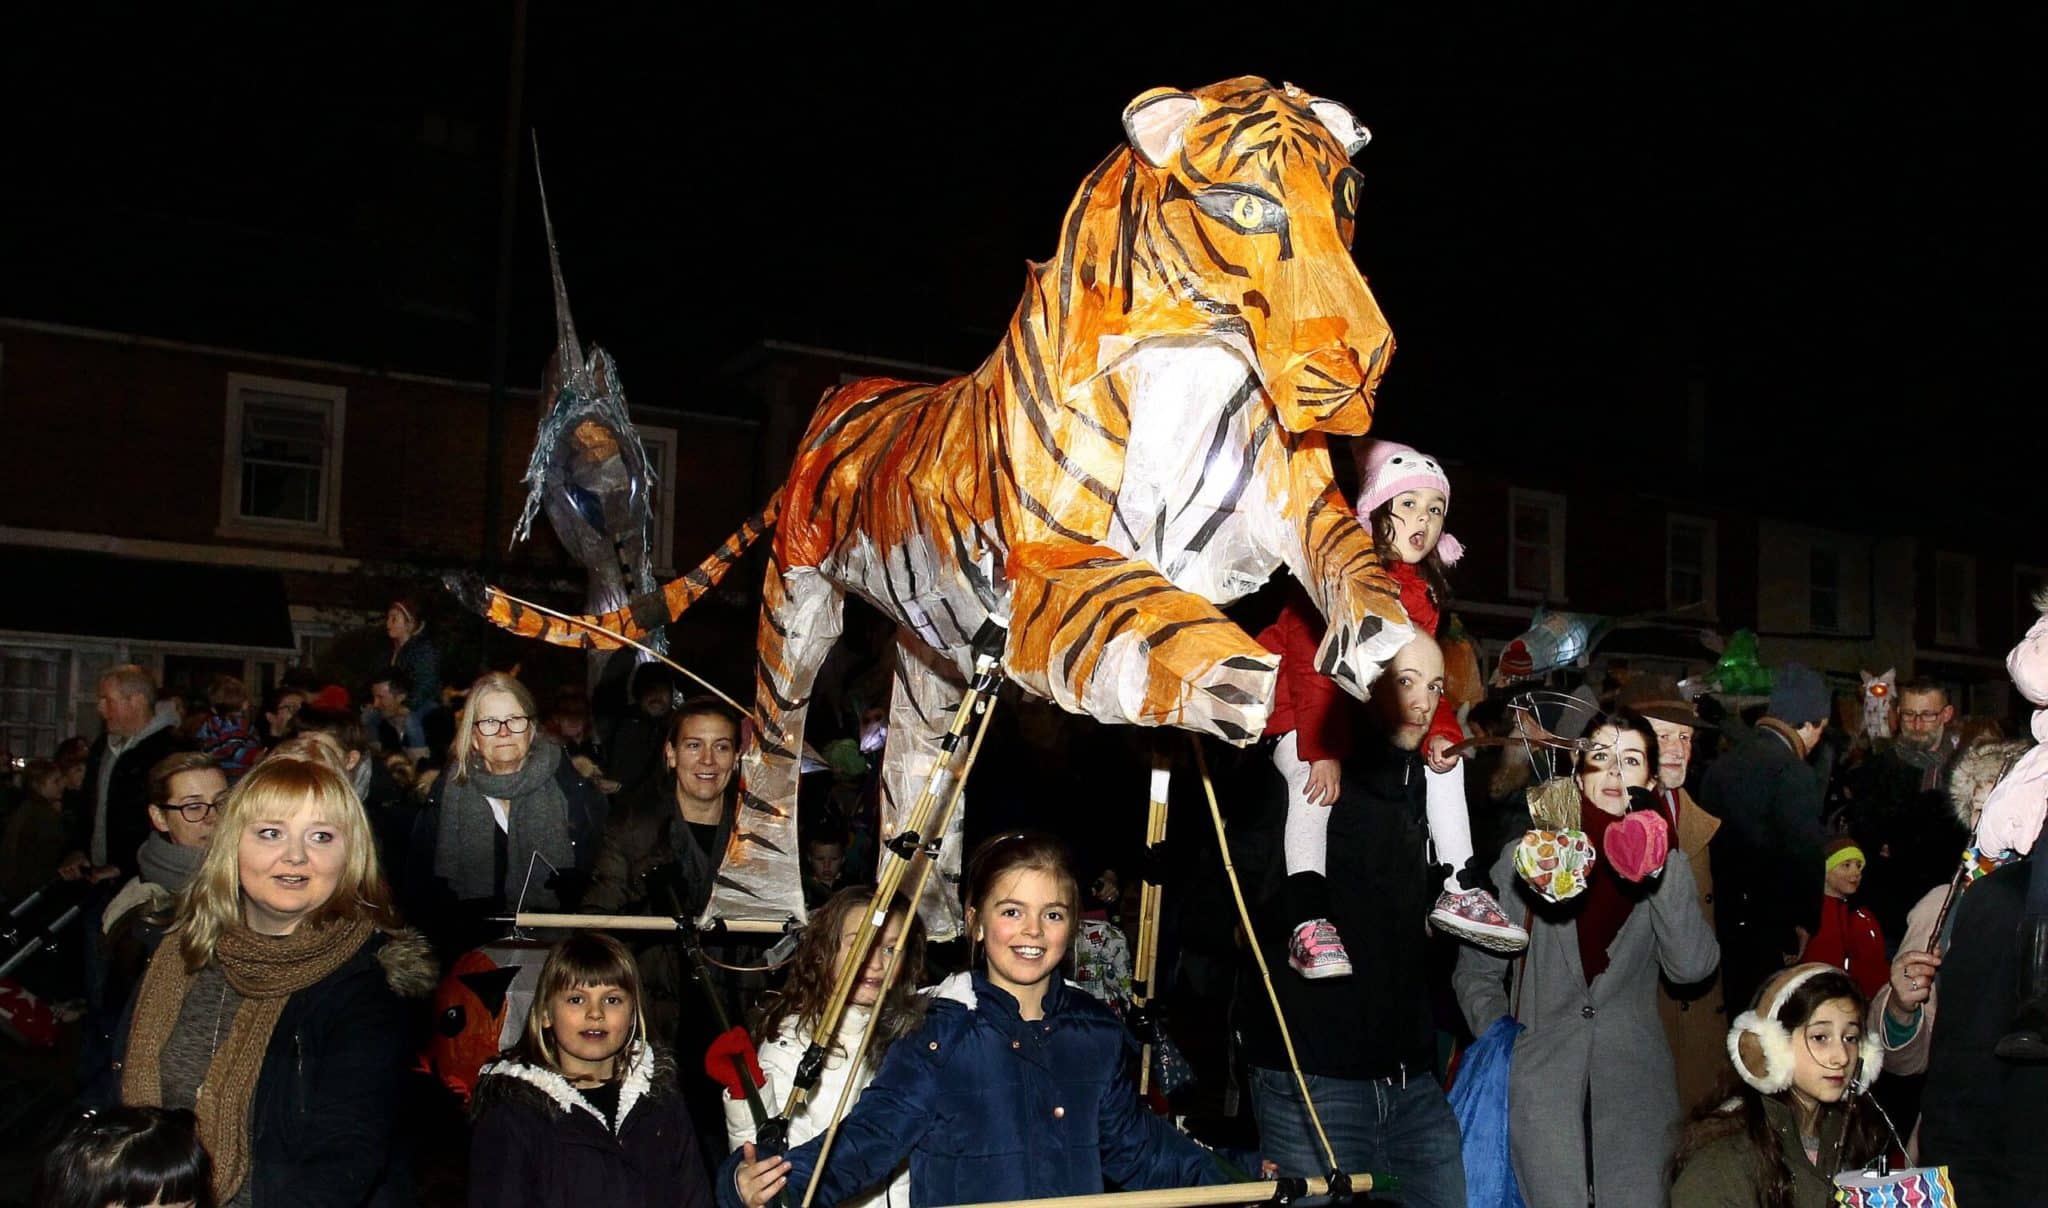 Lights go out on Lantern Parade as it comes to a temporary halt